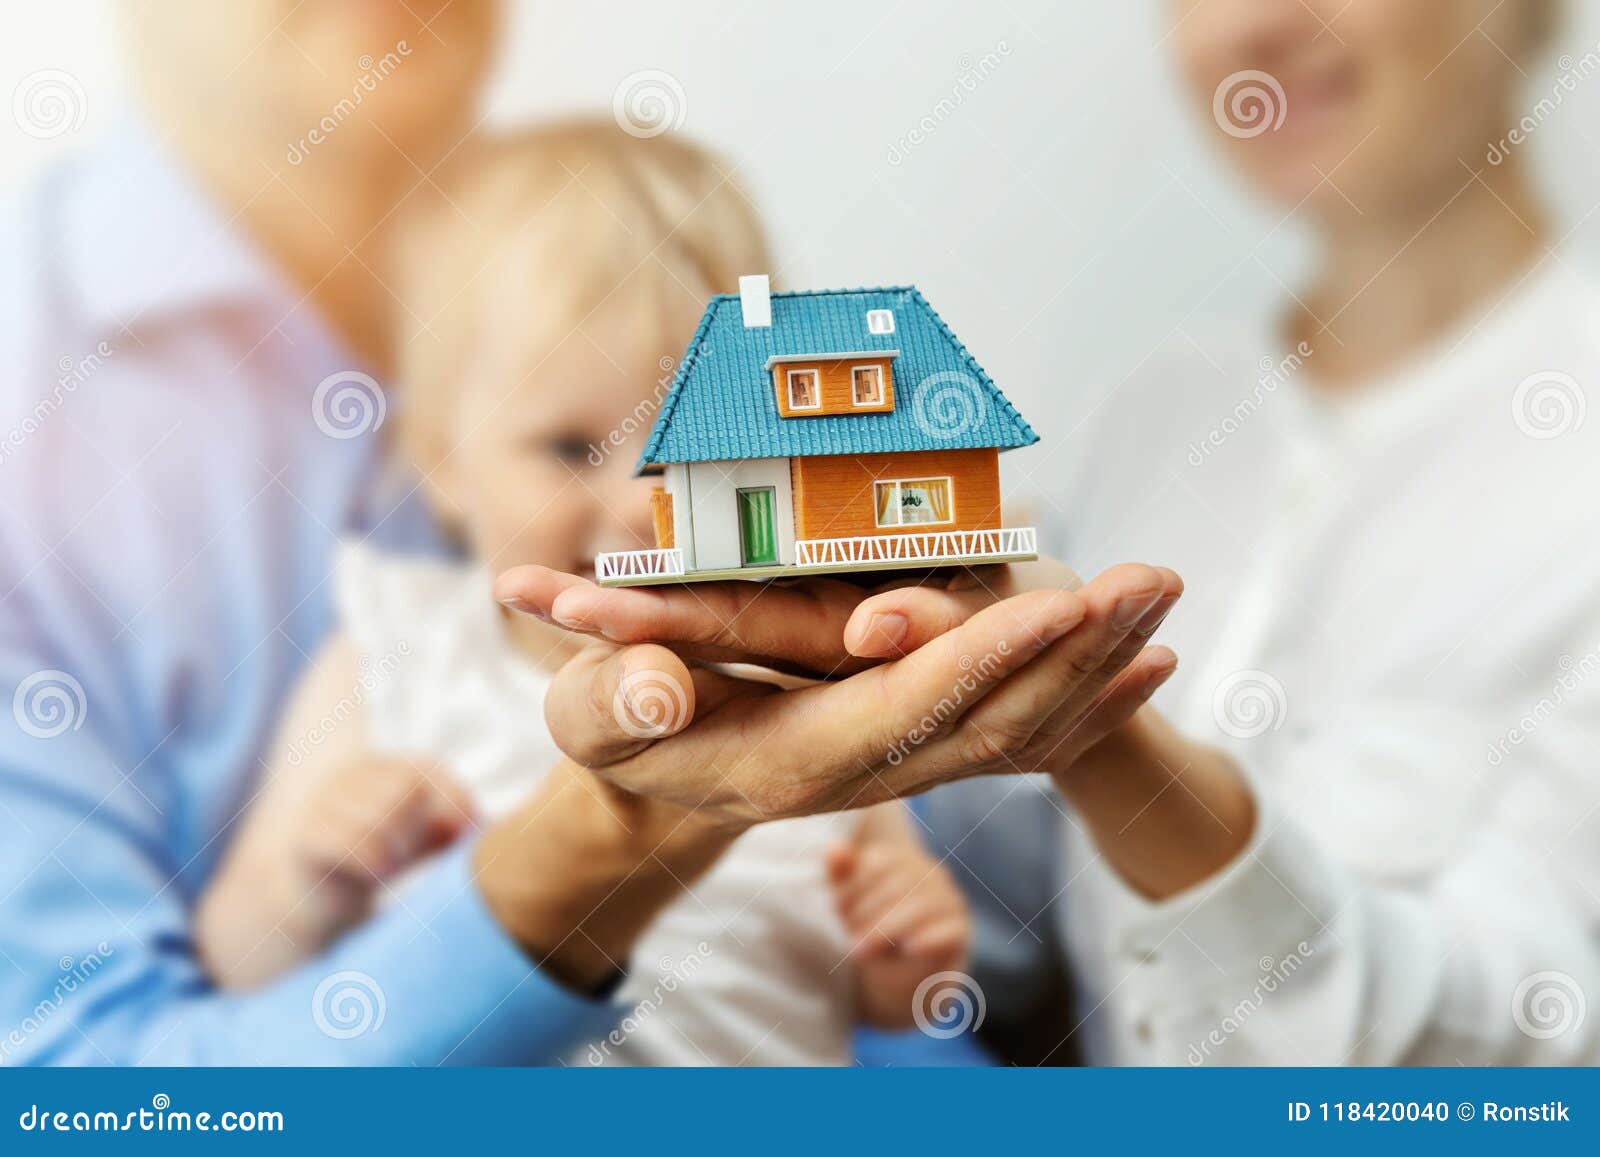 new home concept - young family with dream house scale model